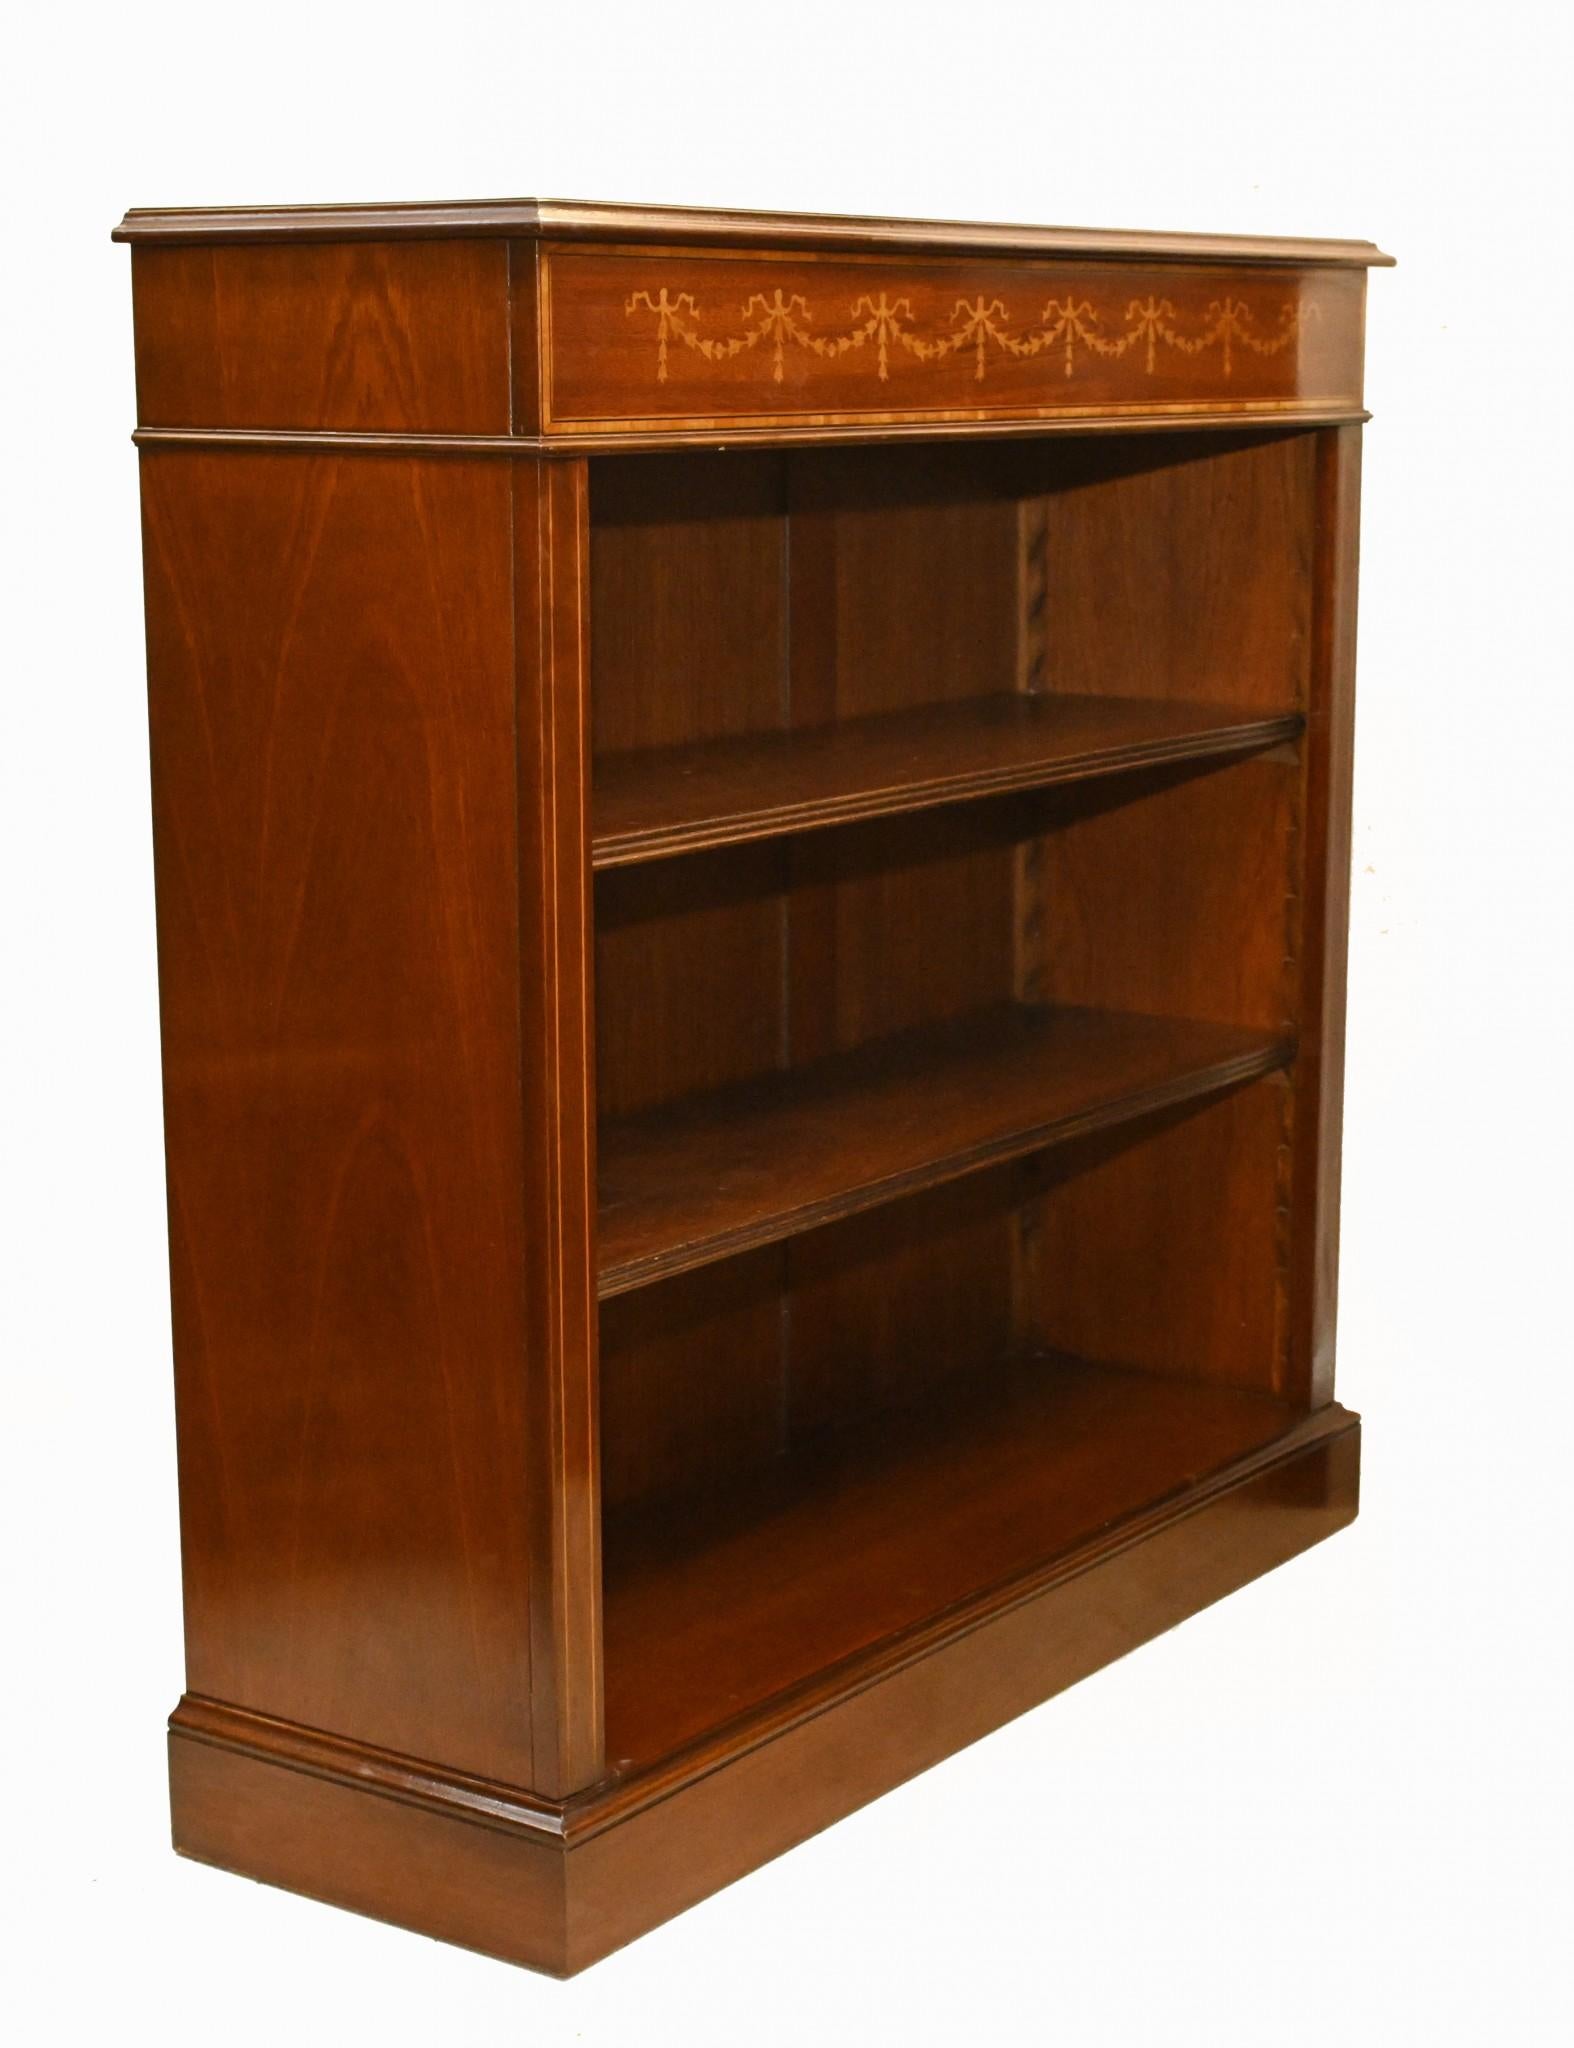 Viewings possible in our Hertfordshire warehouse - please contact for an appointment
Gorgeous single English Sheraton style low openfront bookcases hand crafted from mahogany
Hand crafted in England to centuries old traditions - will last for many